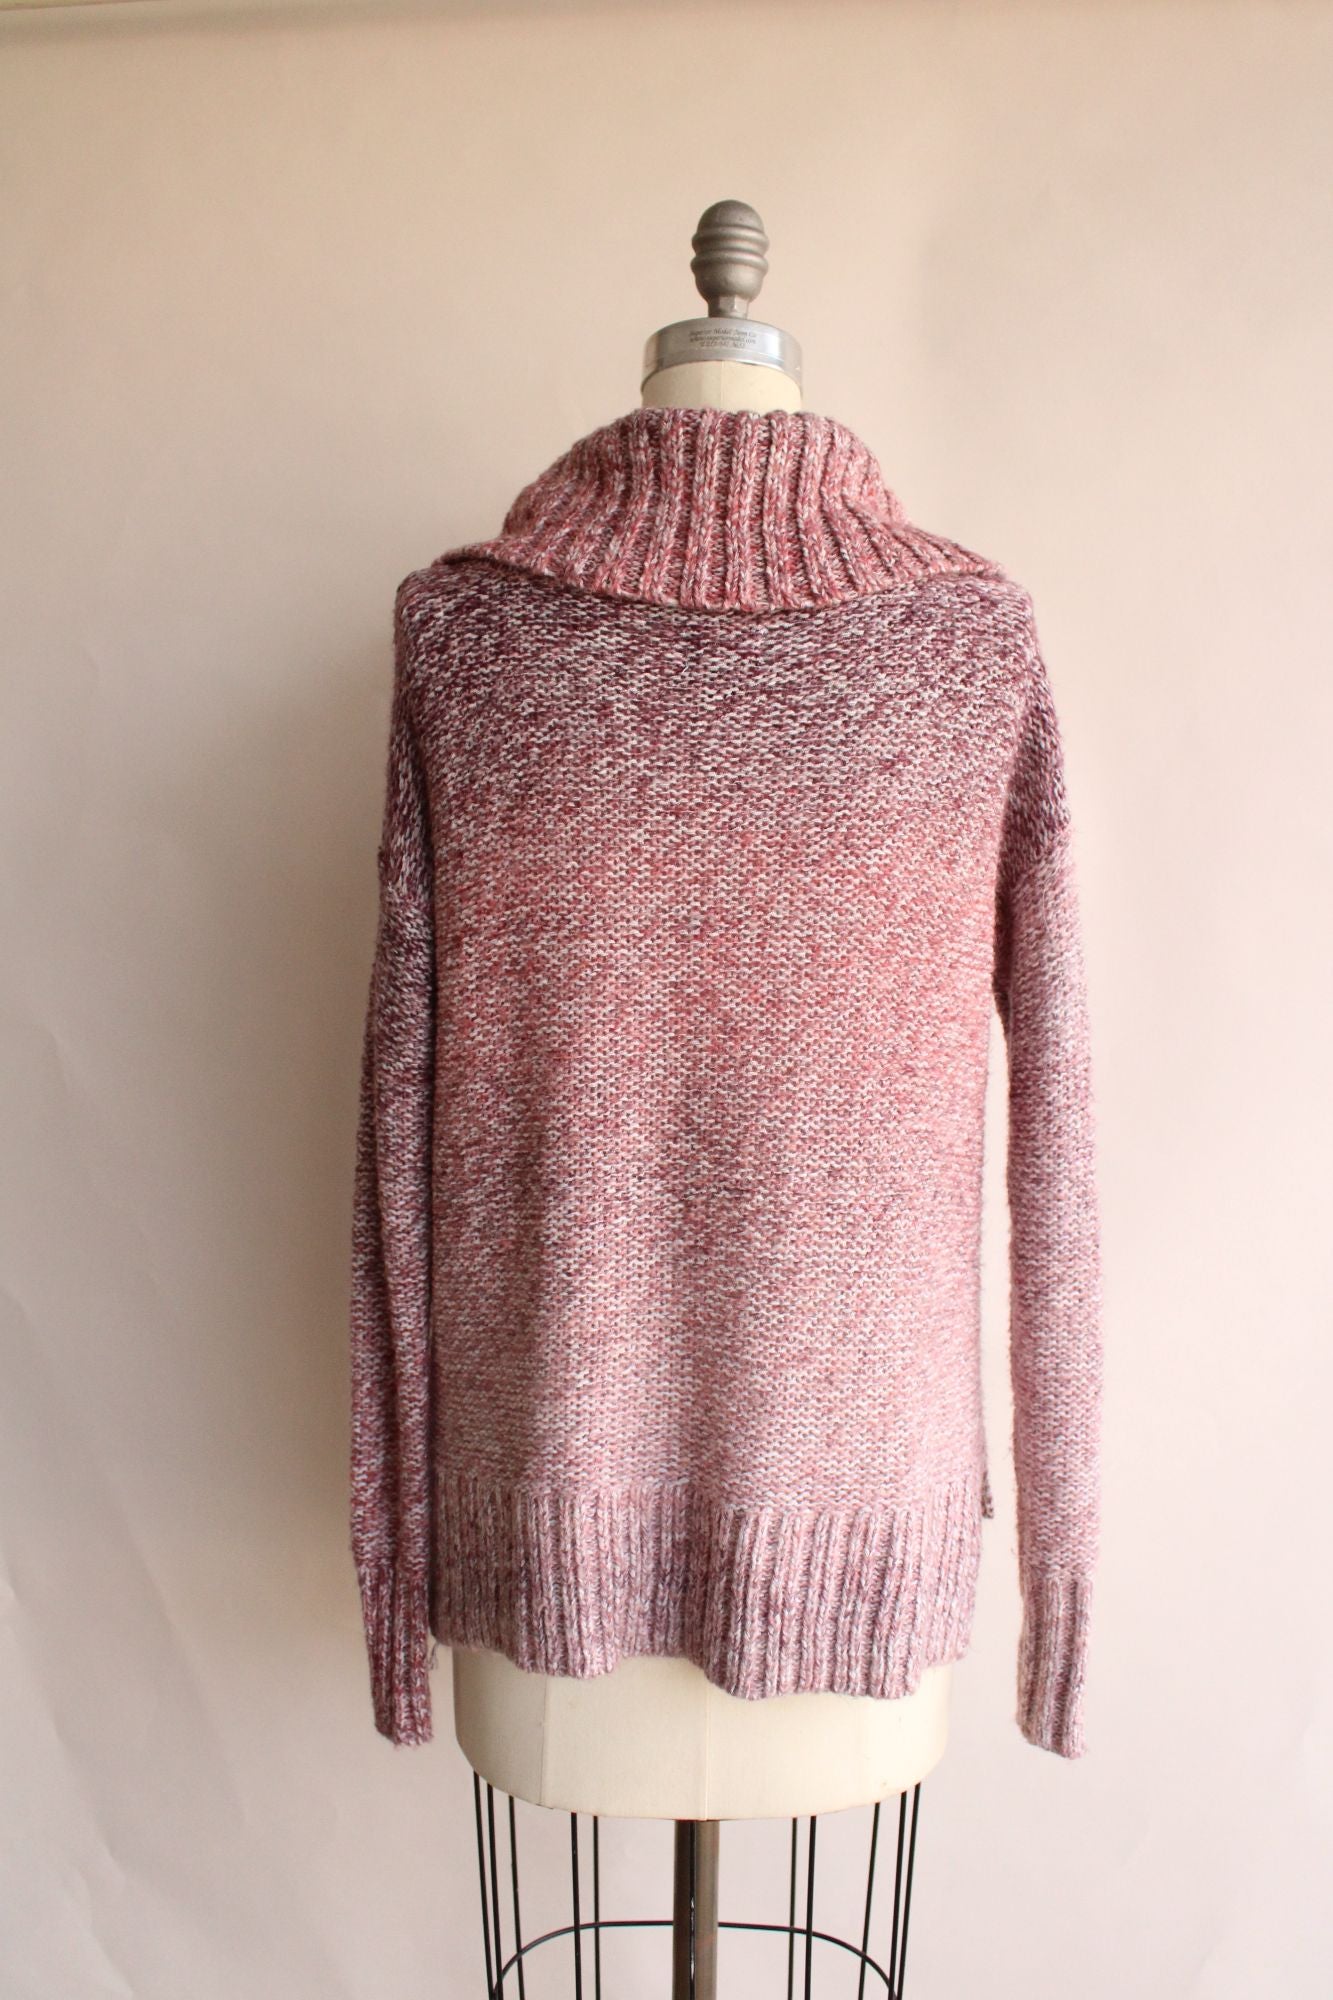 American Eagle Outfitters womans sweater, Size XS, pink, cowl neck